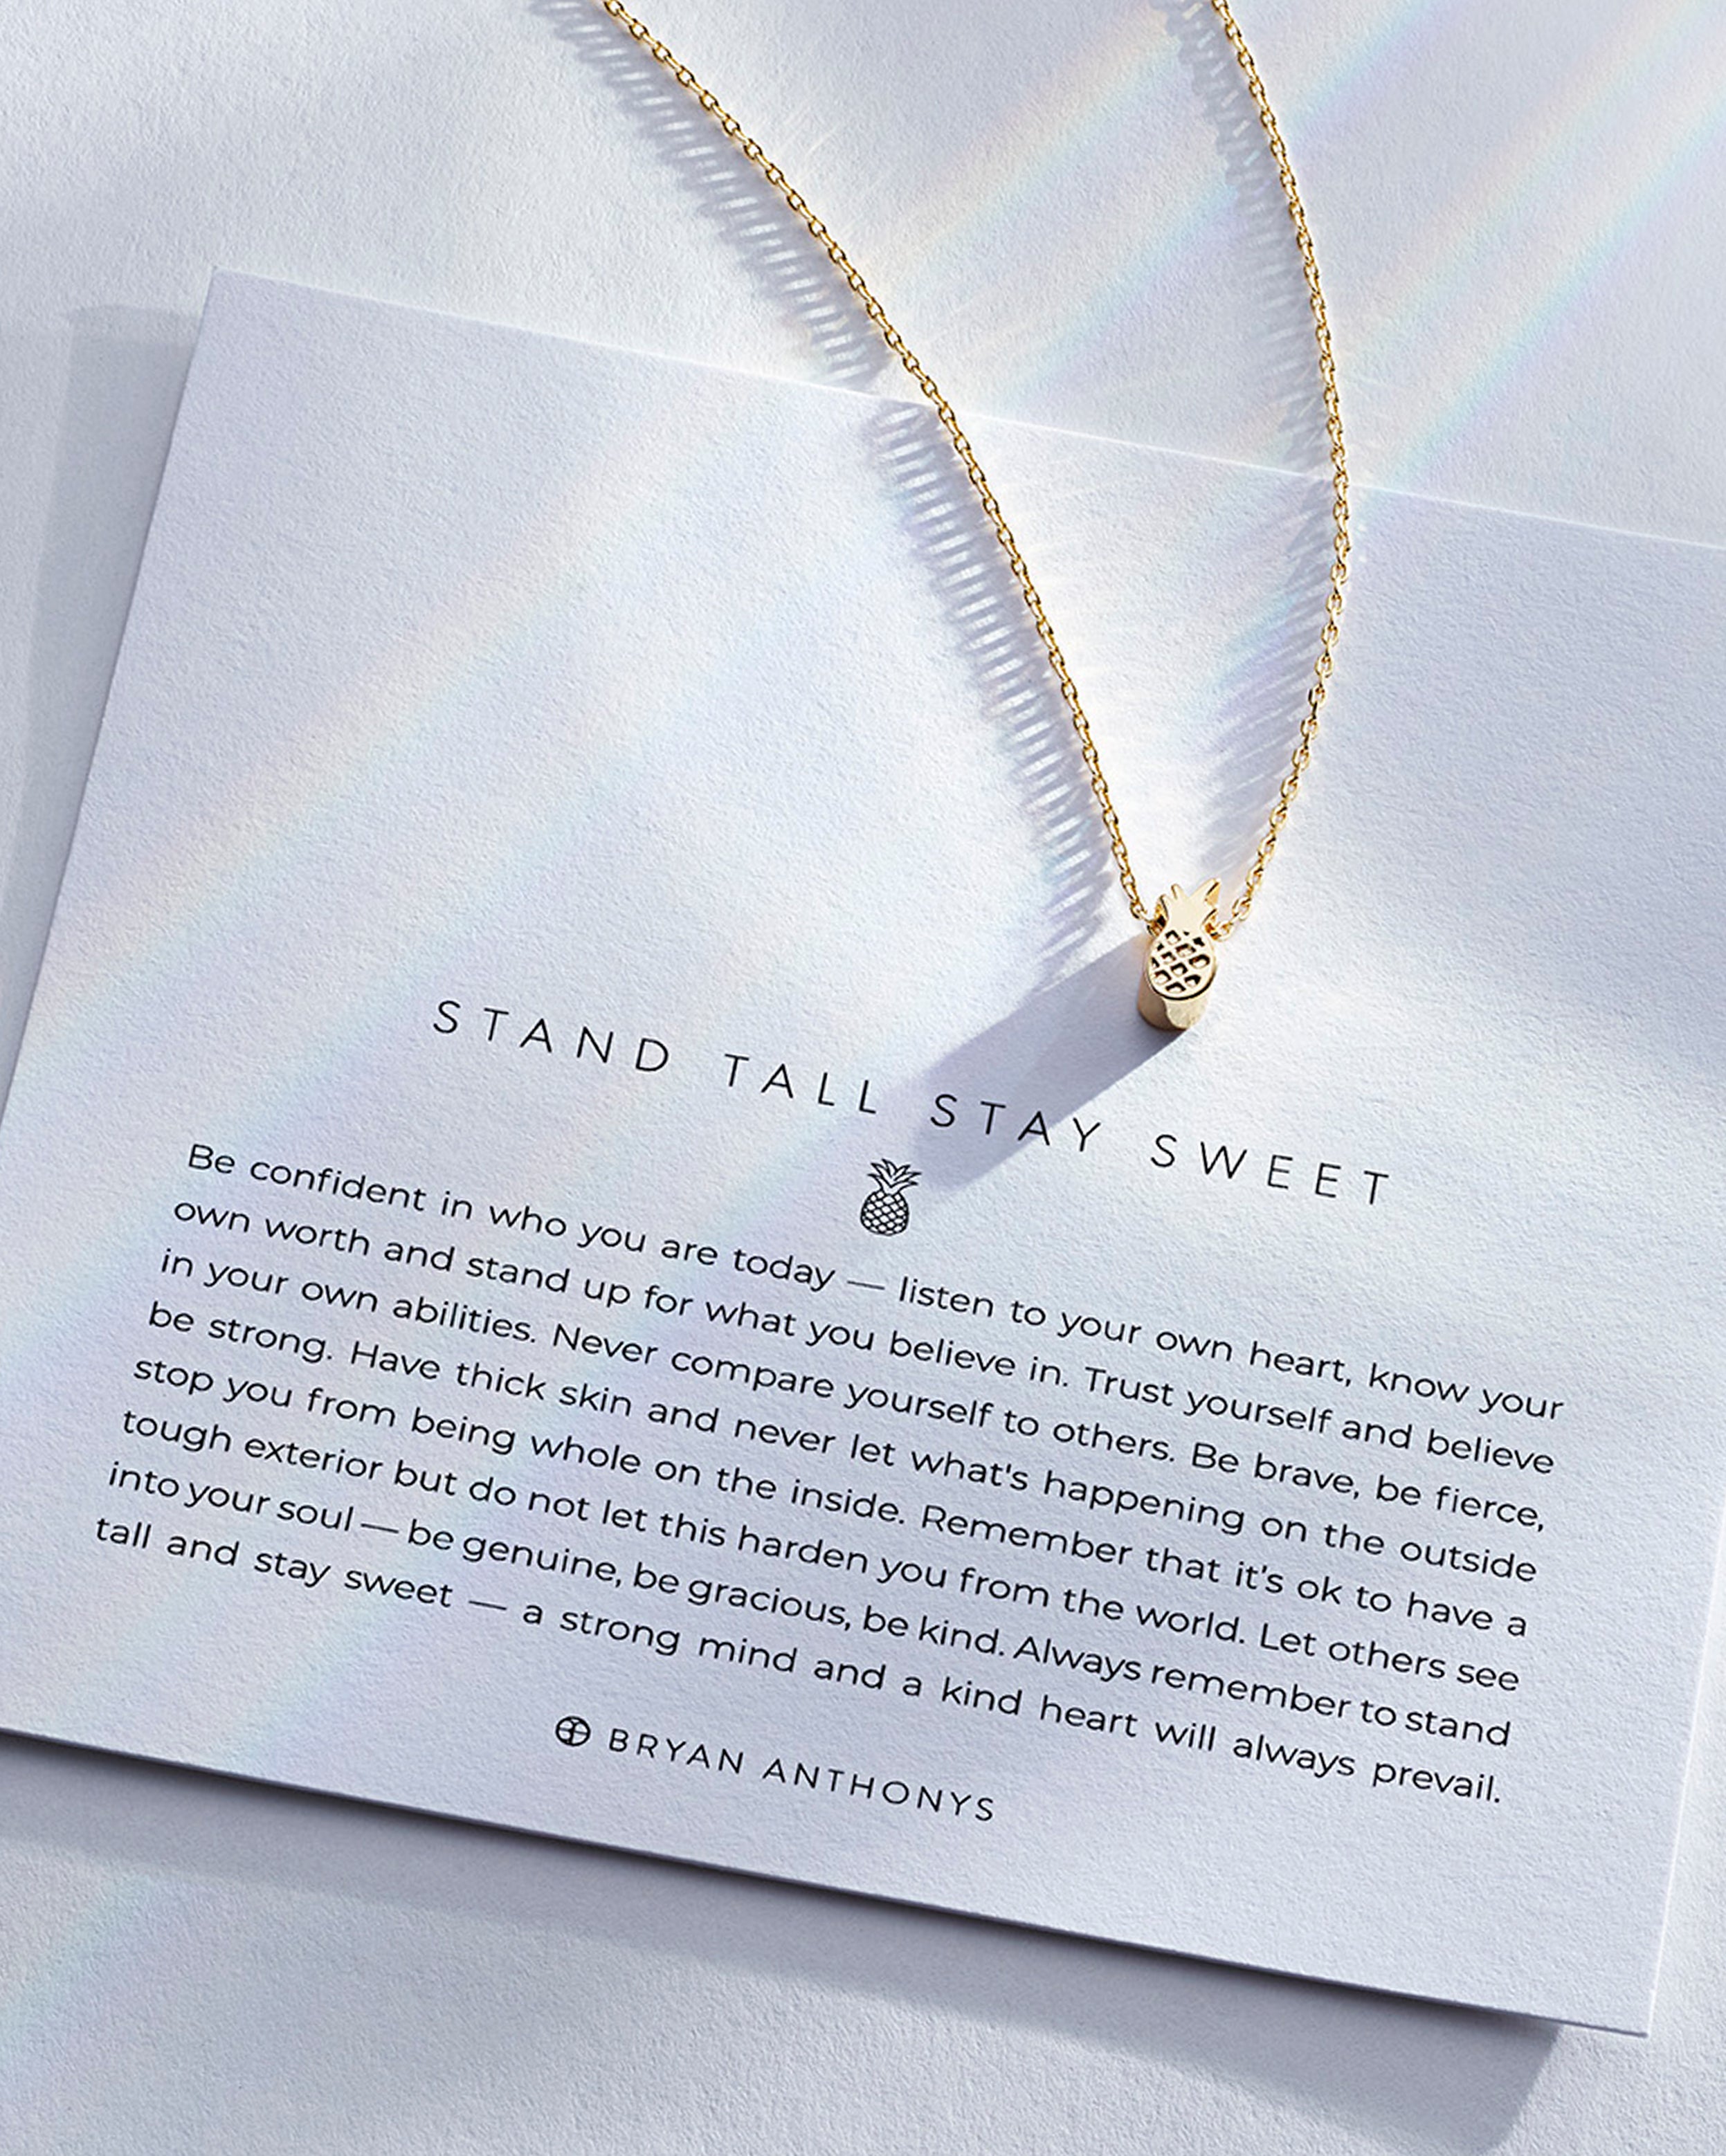 Stand Tall Stay Sweet Necklace showcase on card